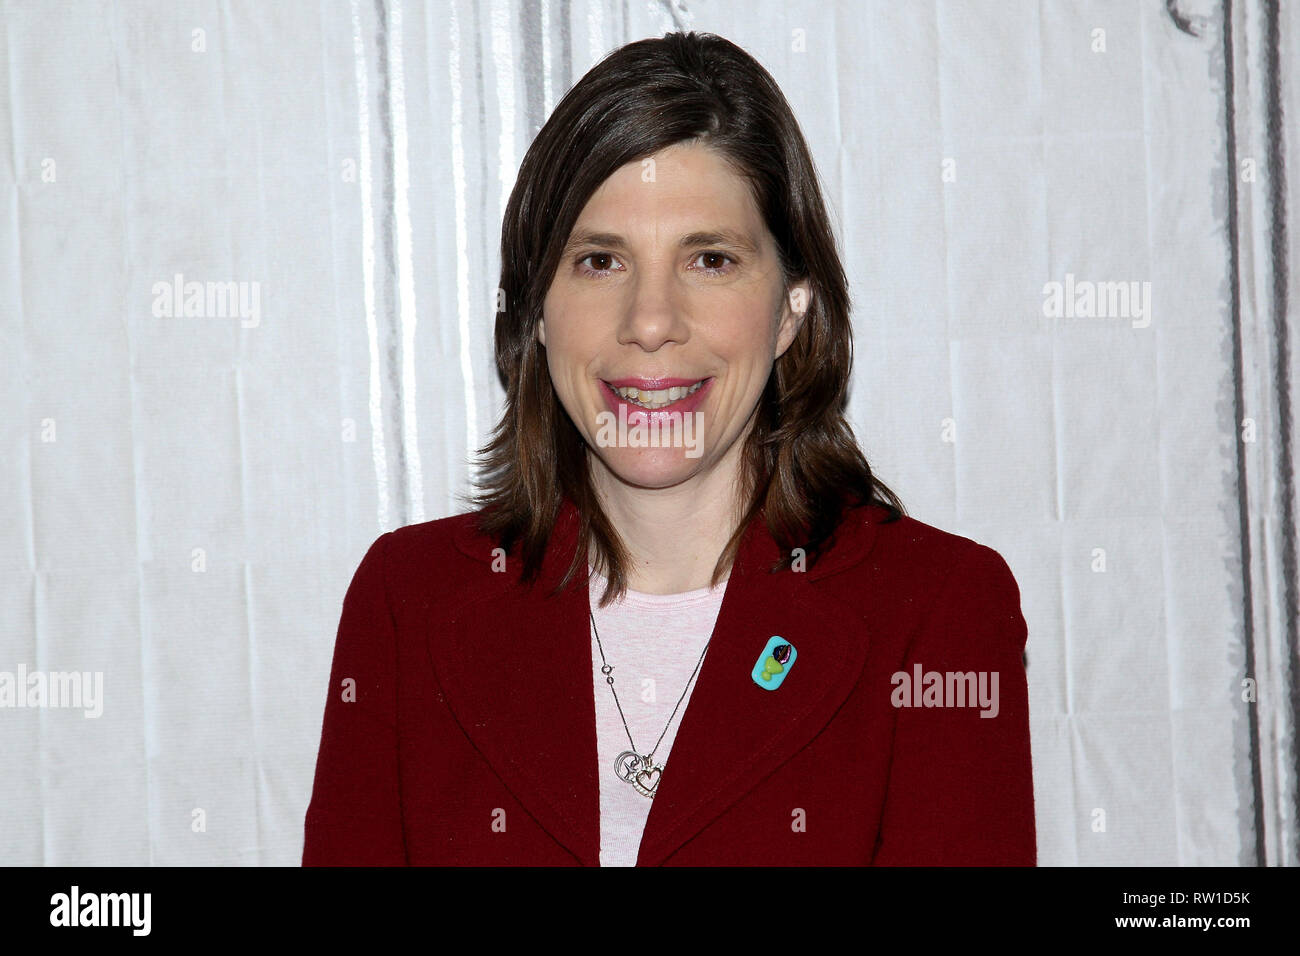 New York, USA. 05 Apr, 2016. Managing Editor, Variety, Cynthia Littleton at The Tuesday, Apr 5, 2016 AOL BUILD Series discussing 'What I Told My Daughter: Lessons From Leaders On Raising The Next Generation Of Empowered Women' at AOL Studios In New York in New York, USA. Credit: Steve Mack/S.D. Mack Pictures/Alamy Stock Photo